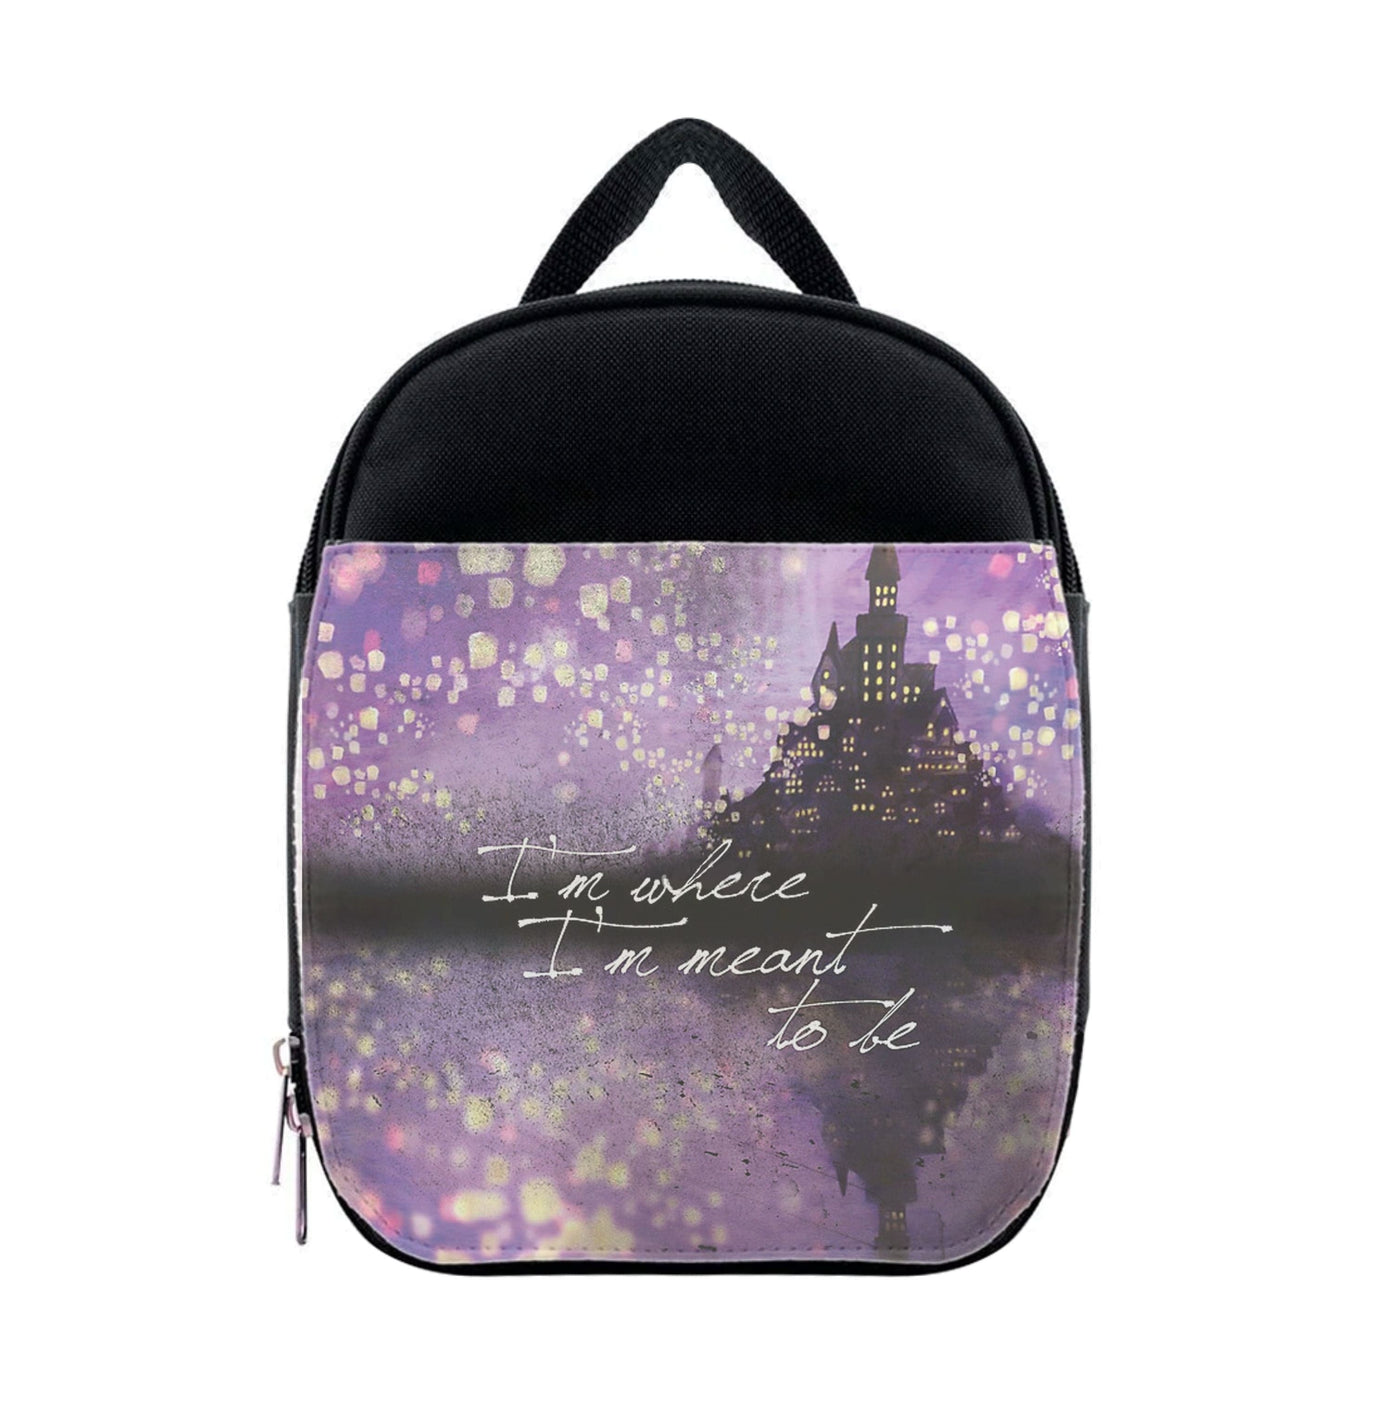 I'm Where I'm Meant To Be - Disney Tangled Lunchbox